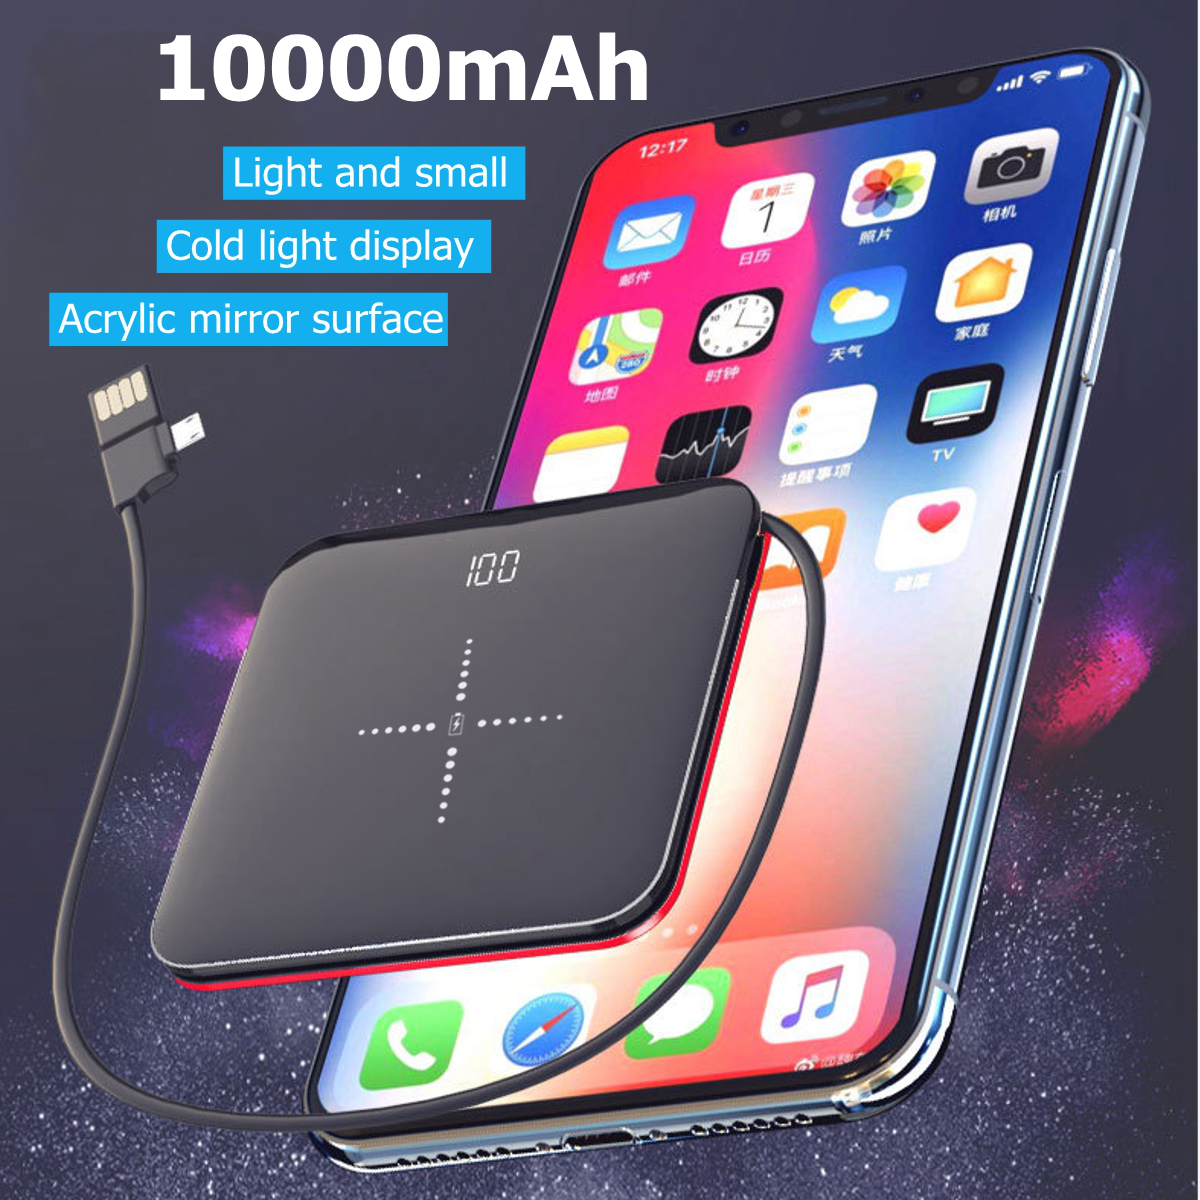 Bakeey-Qi-Wireless-Charger-Power-Bank-10000mAh-Dual-USB-21A-Fast-Charging-with-Cable-1436440-2